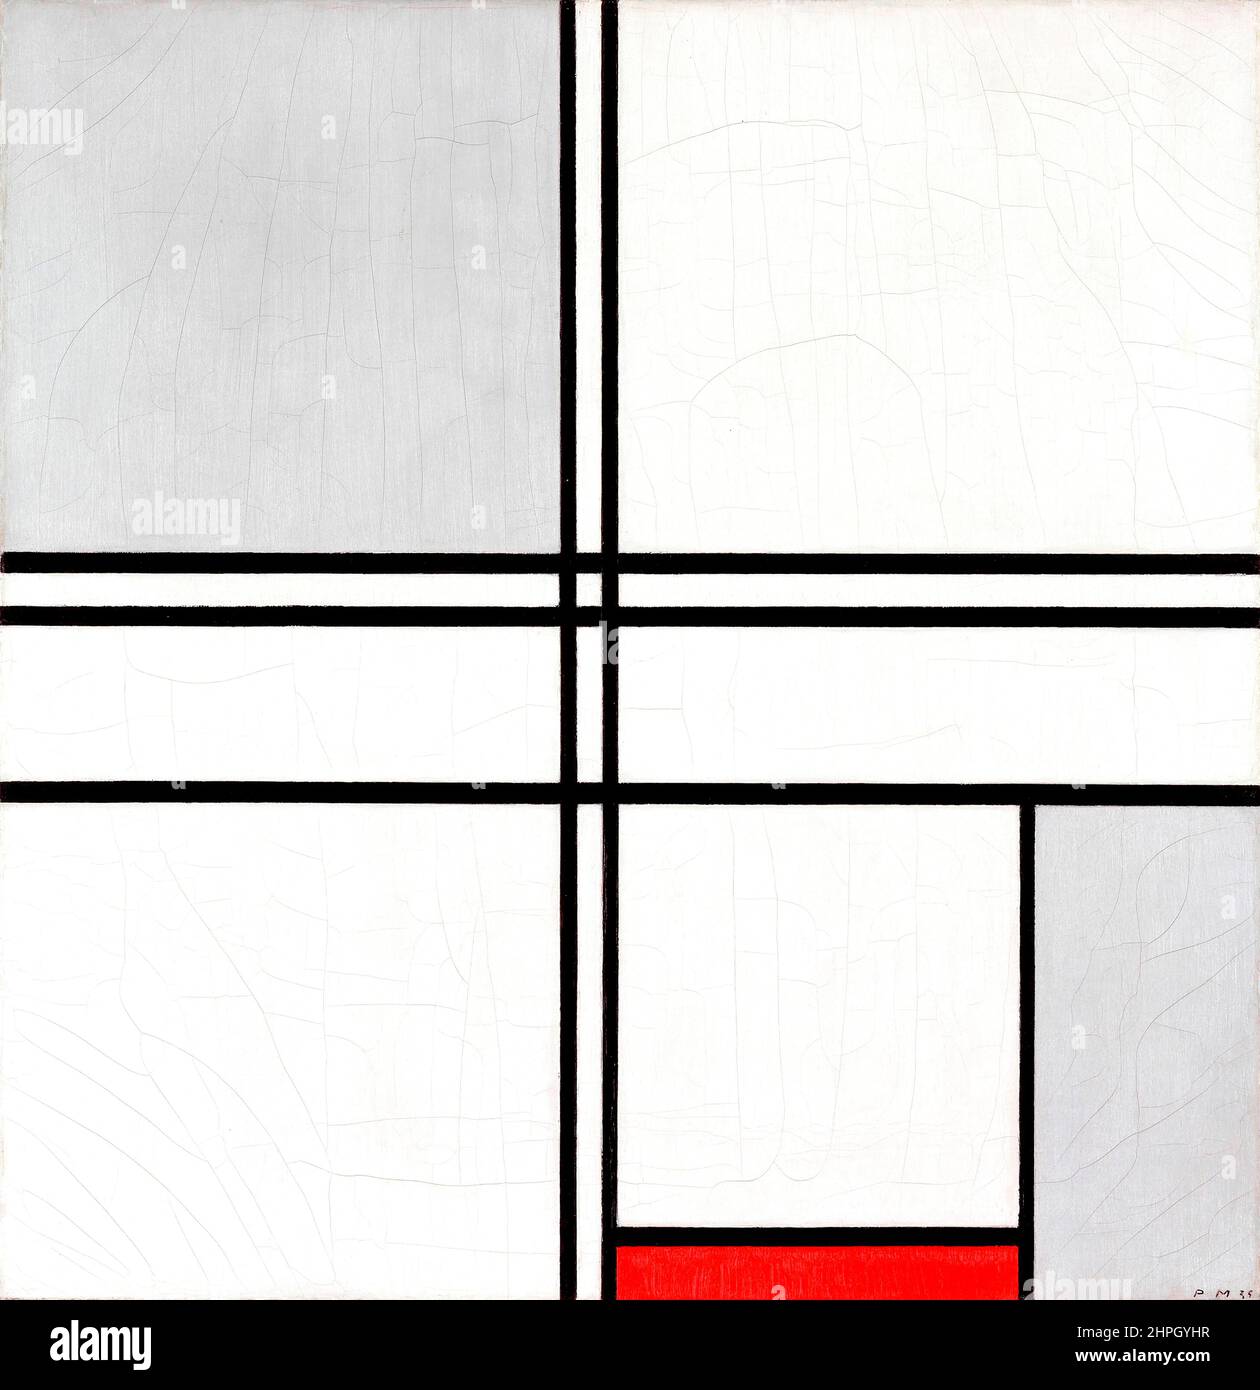 Composition (No. 1) Gray-Red by Piet Mondrian (Mondriaan) (1872-1944), oil on canvas, 1935 Stock Photo